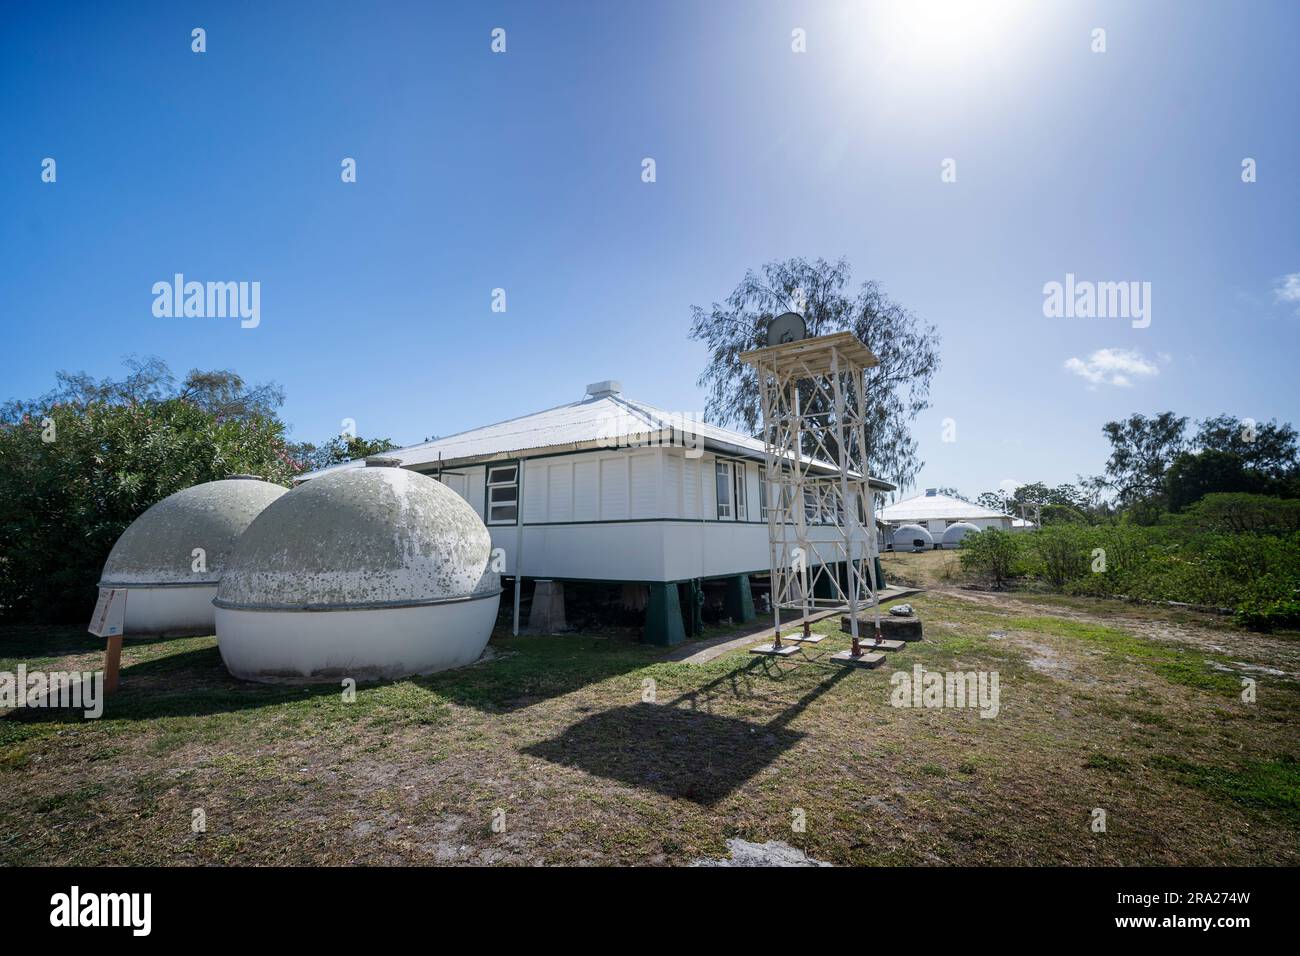 Lighthouse Keepers Cottages, Lady Elliot Island, grande Barriera Corallina, Queensland, Australia Foto Stock